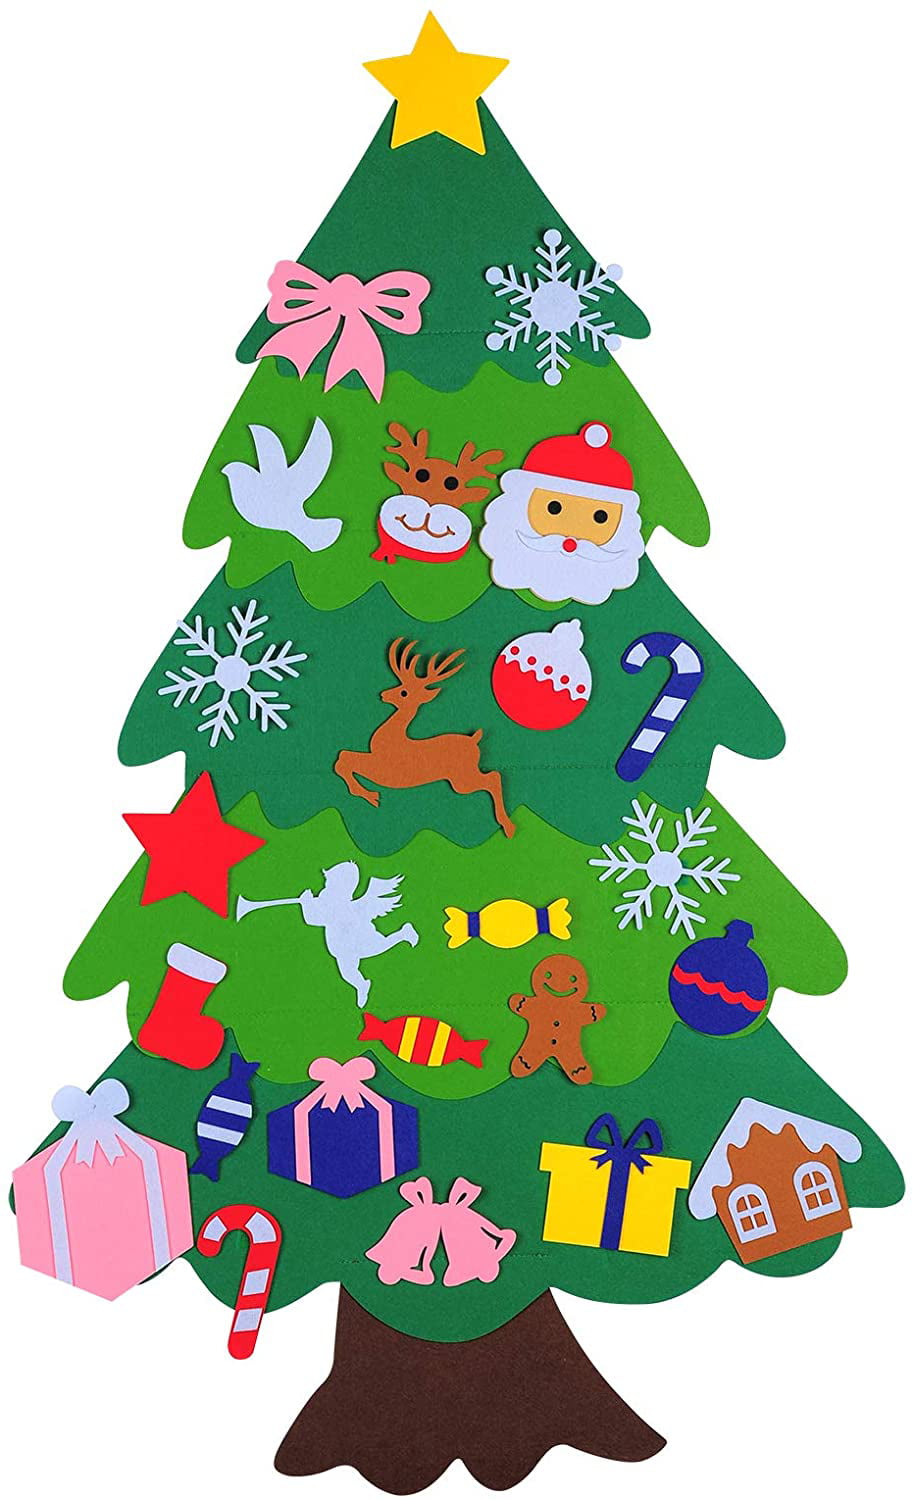 Window 3.5Ft Wall Hanging Felt Tree Decoration for Holiday Party DIY Felt Xmas Trees with 37pcs Ornament Set for Toddlers Xmas Gift Home Decor Appok Felt Christmas Tree for Kids 